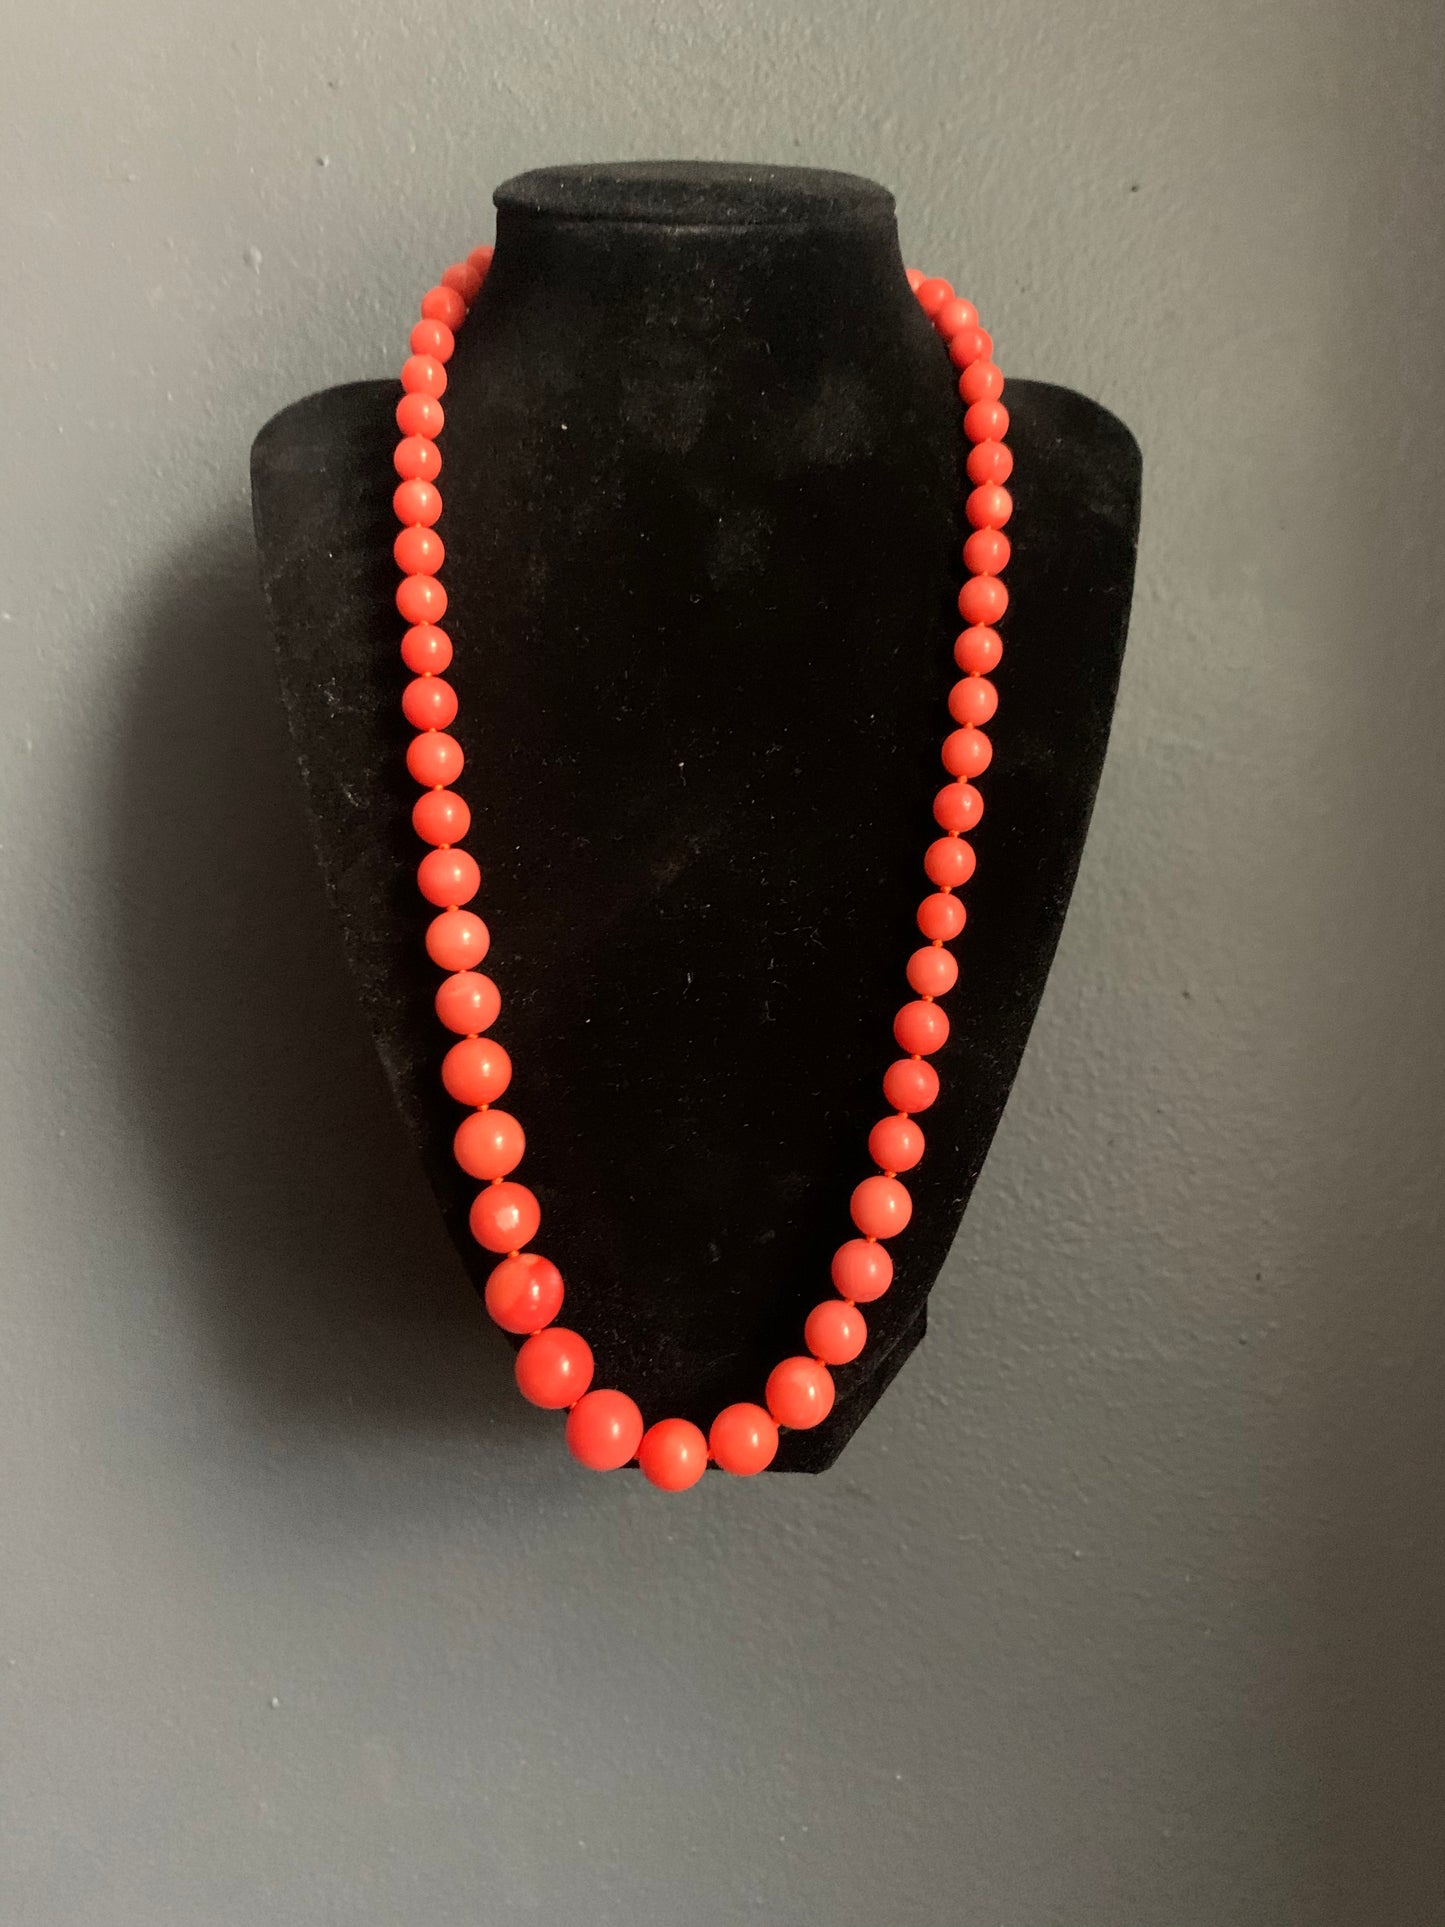 A coral like bead necklace